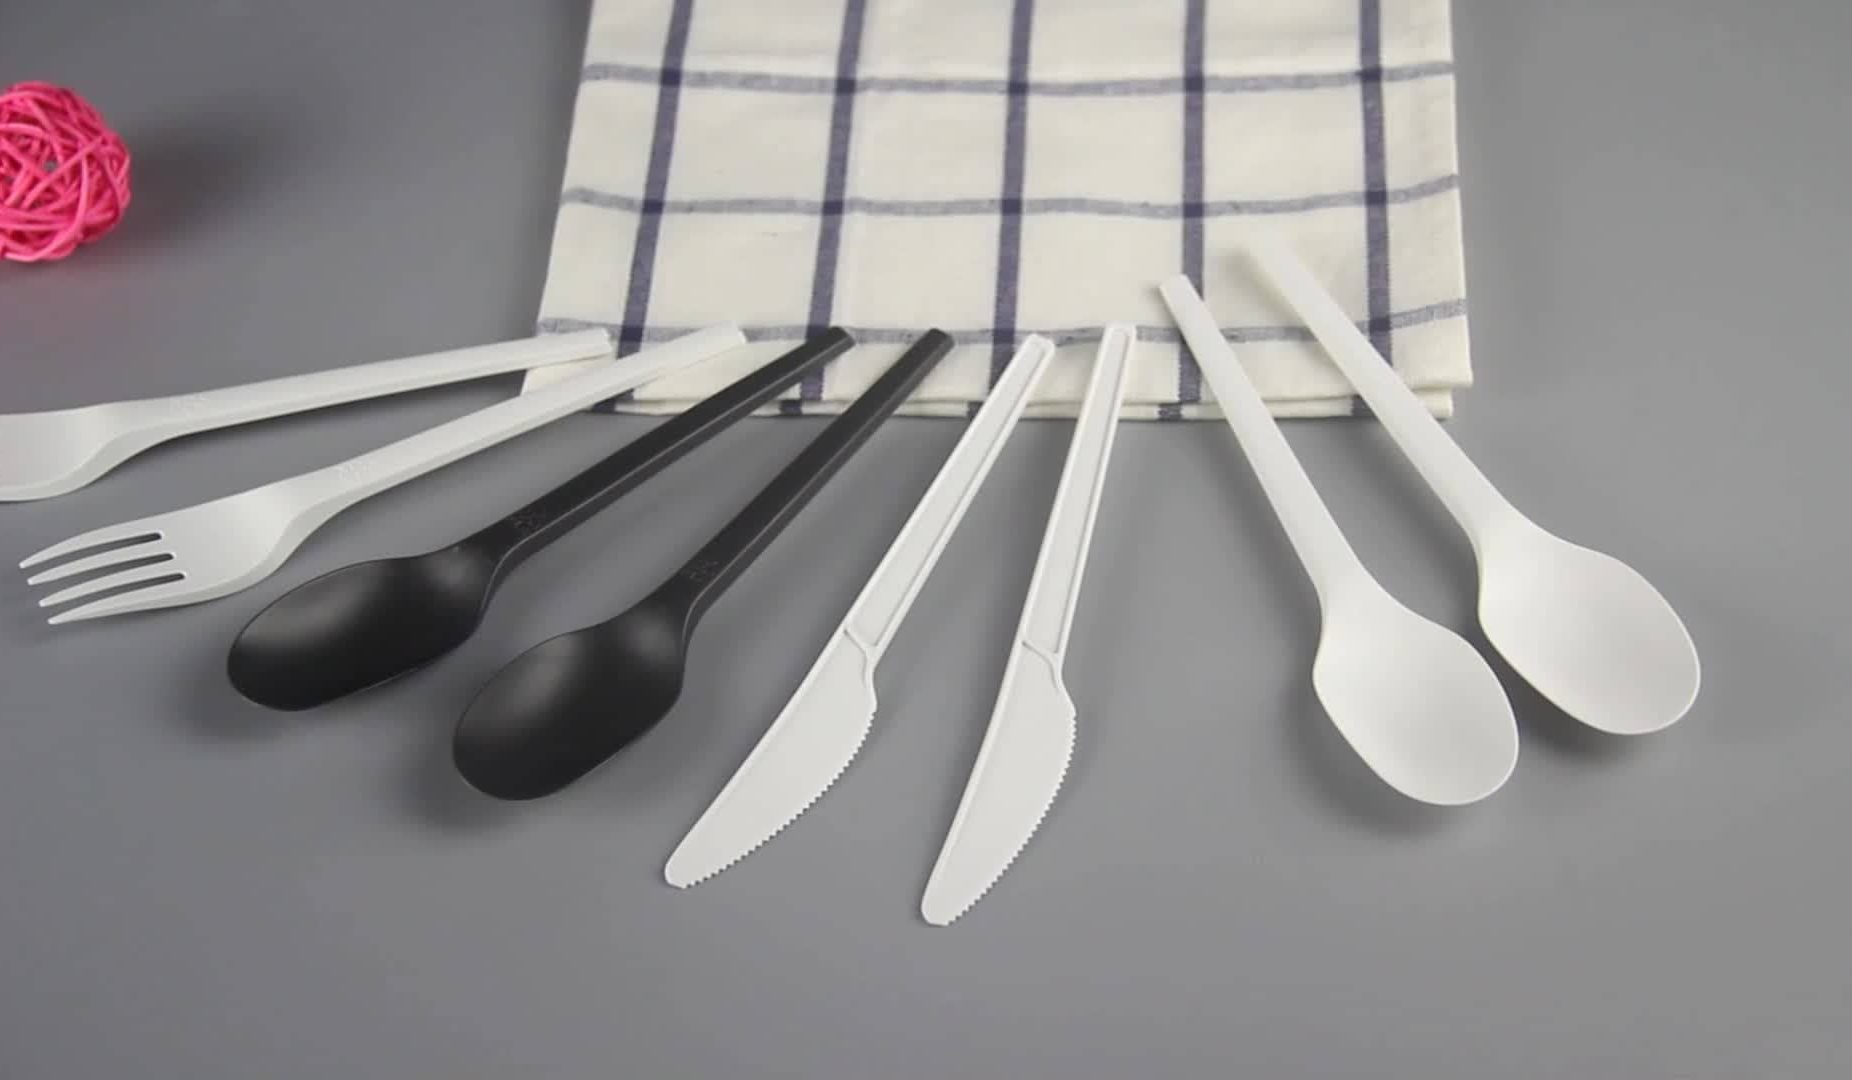  Reusable plastic picnic cutlery set | Reasonable Price, Great Purchase 